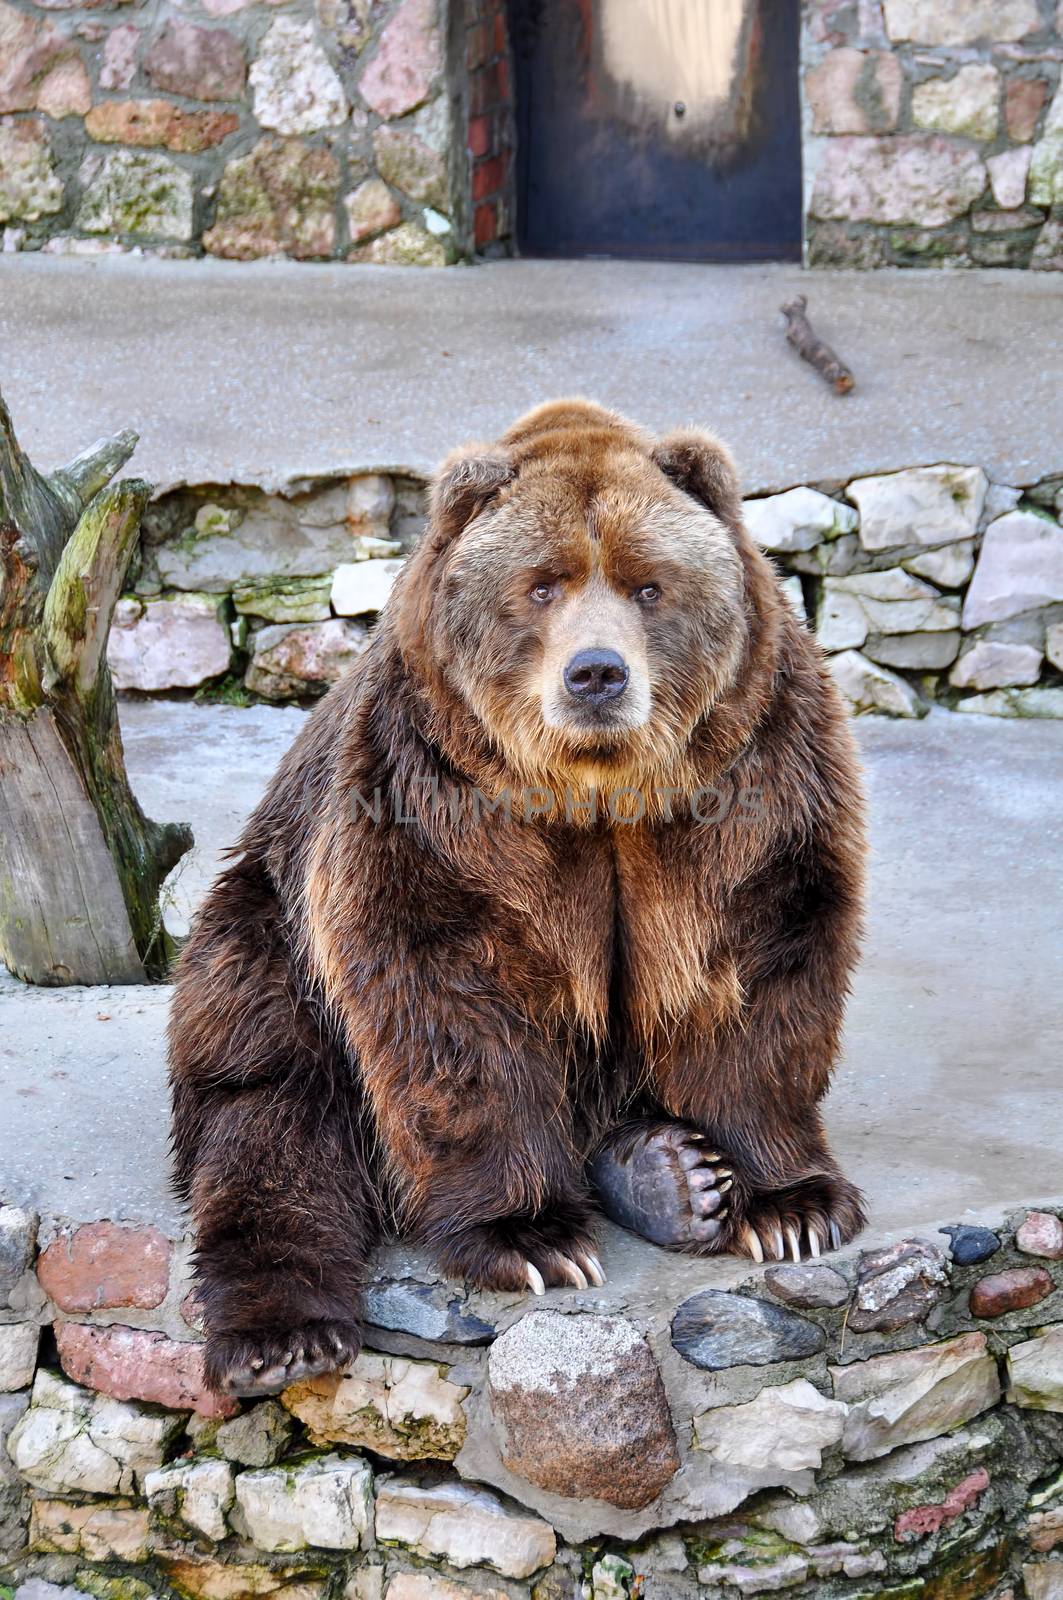 Grizzly brown bear looking at people in zoo, Latvia